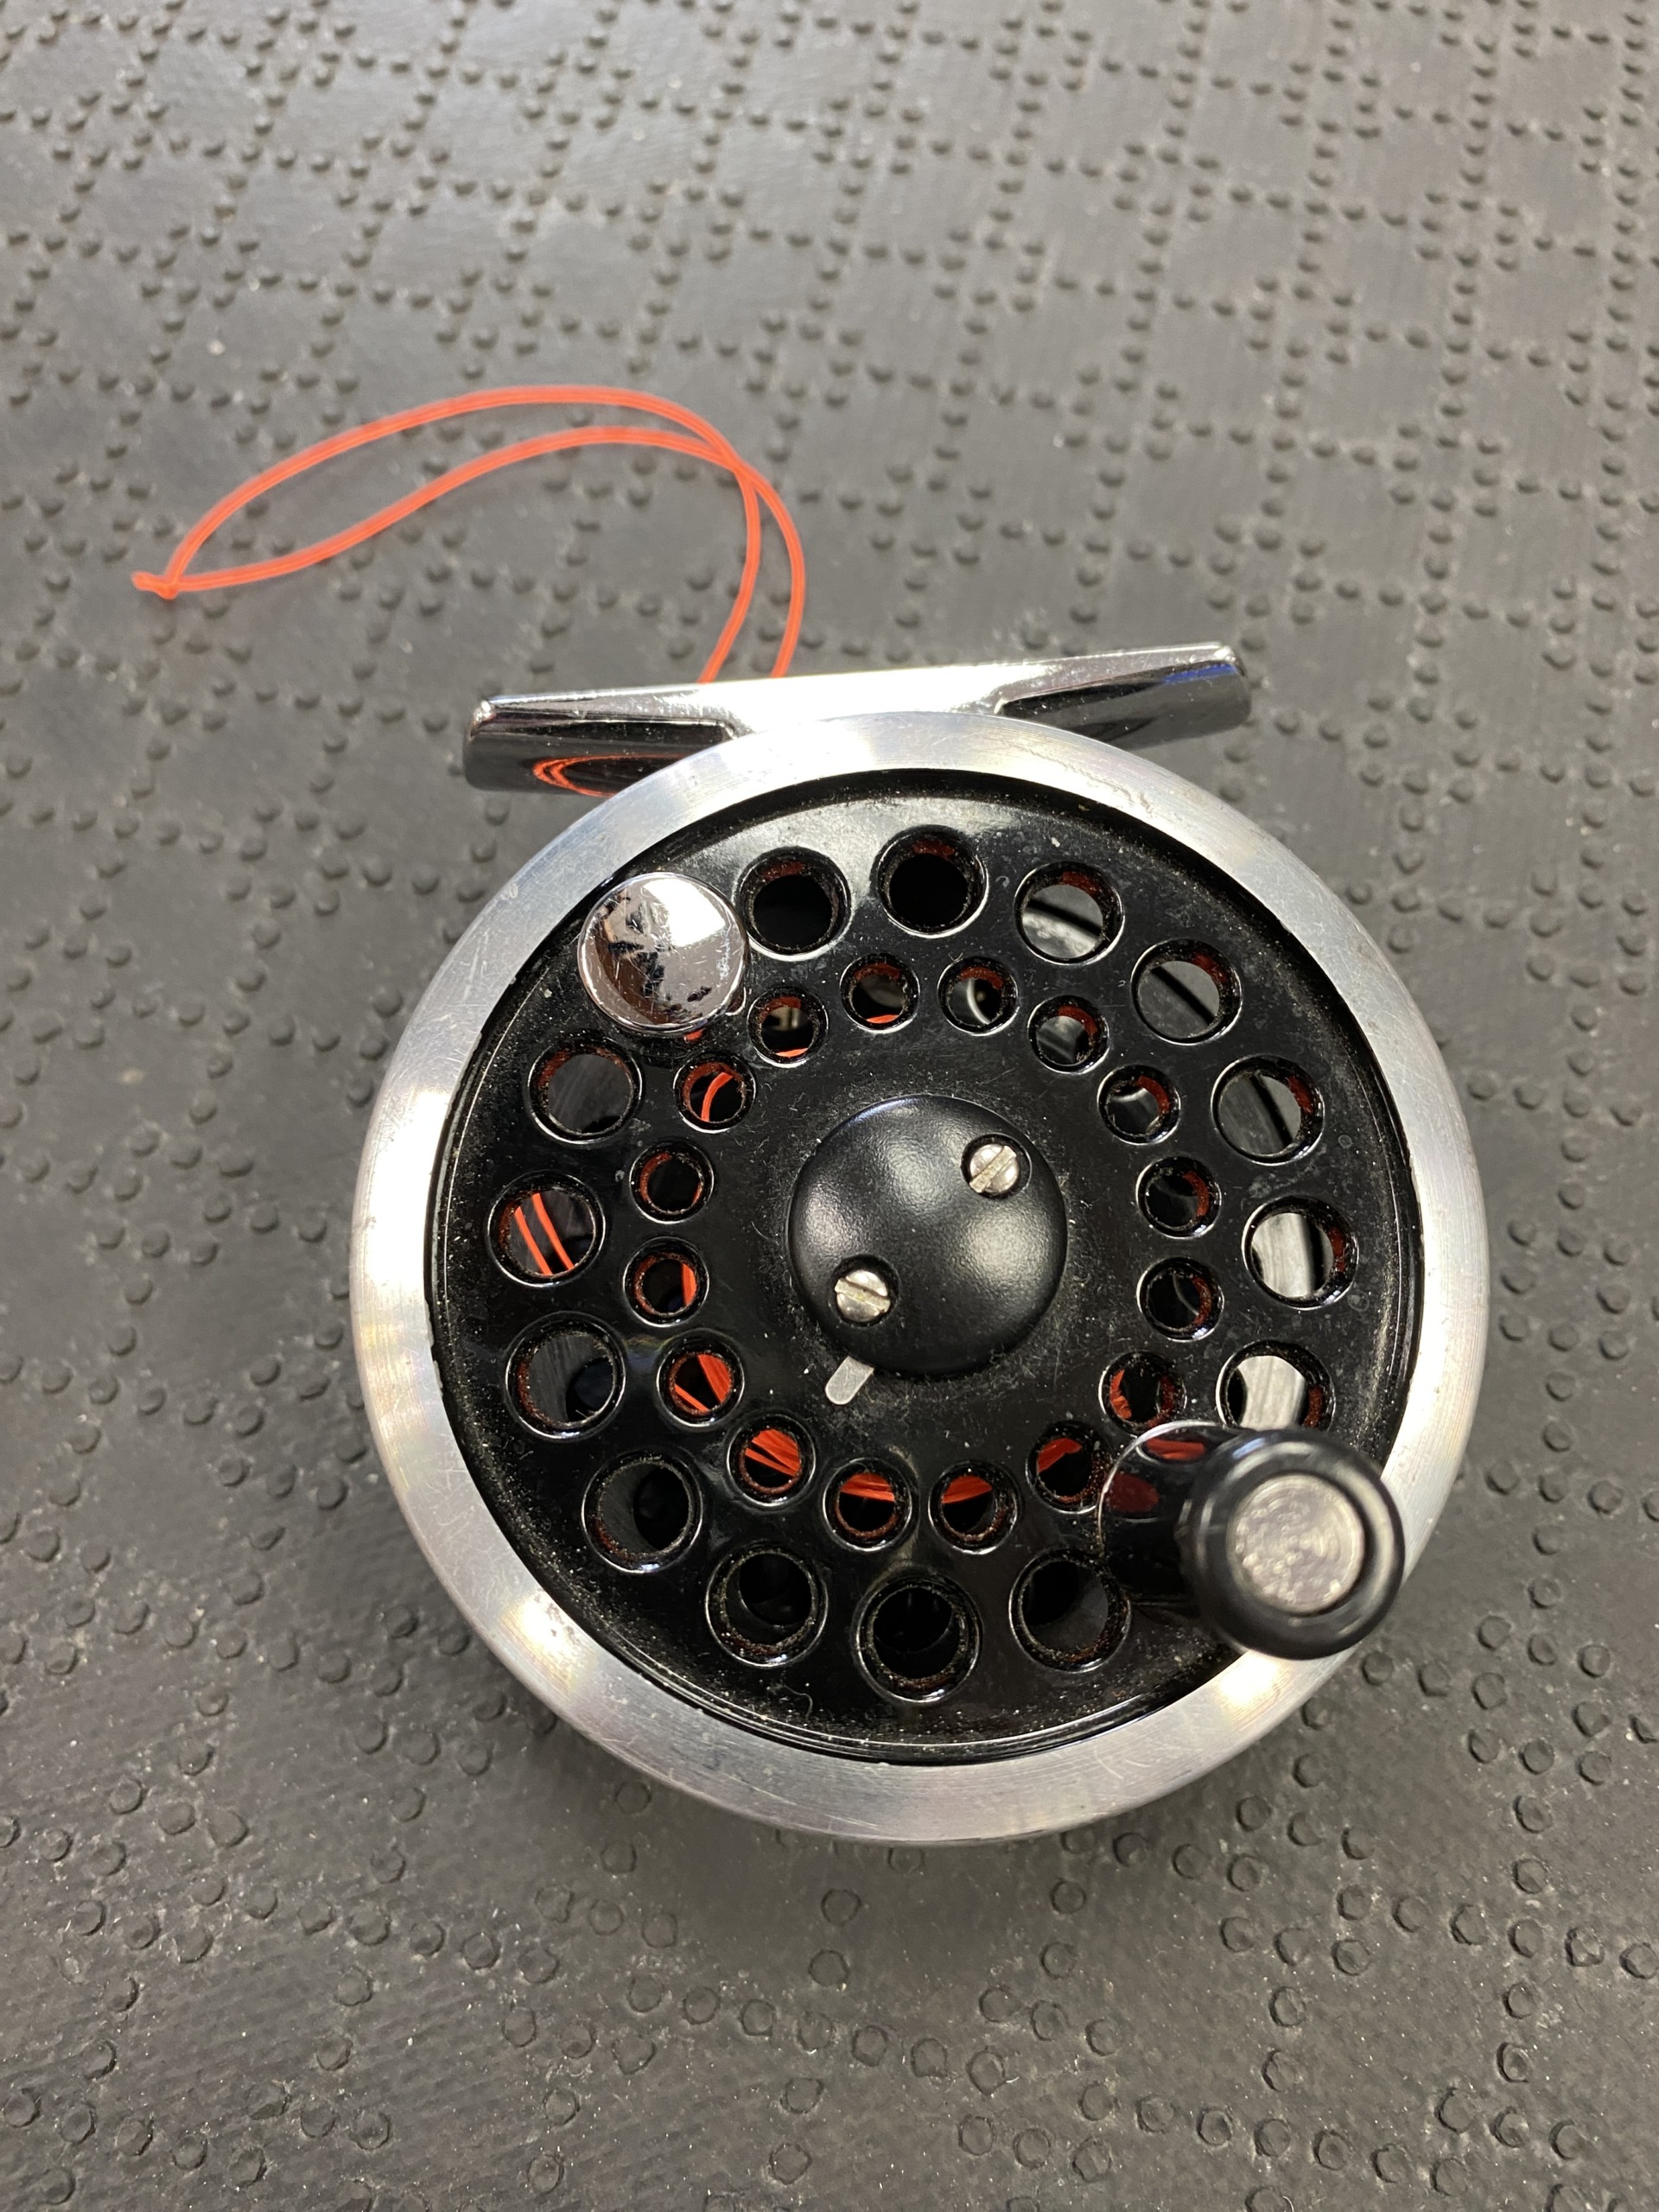 White River - 5/6 Classic Fly Reel - C/W Backing - GREAT SHAPE! - $50